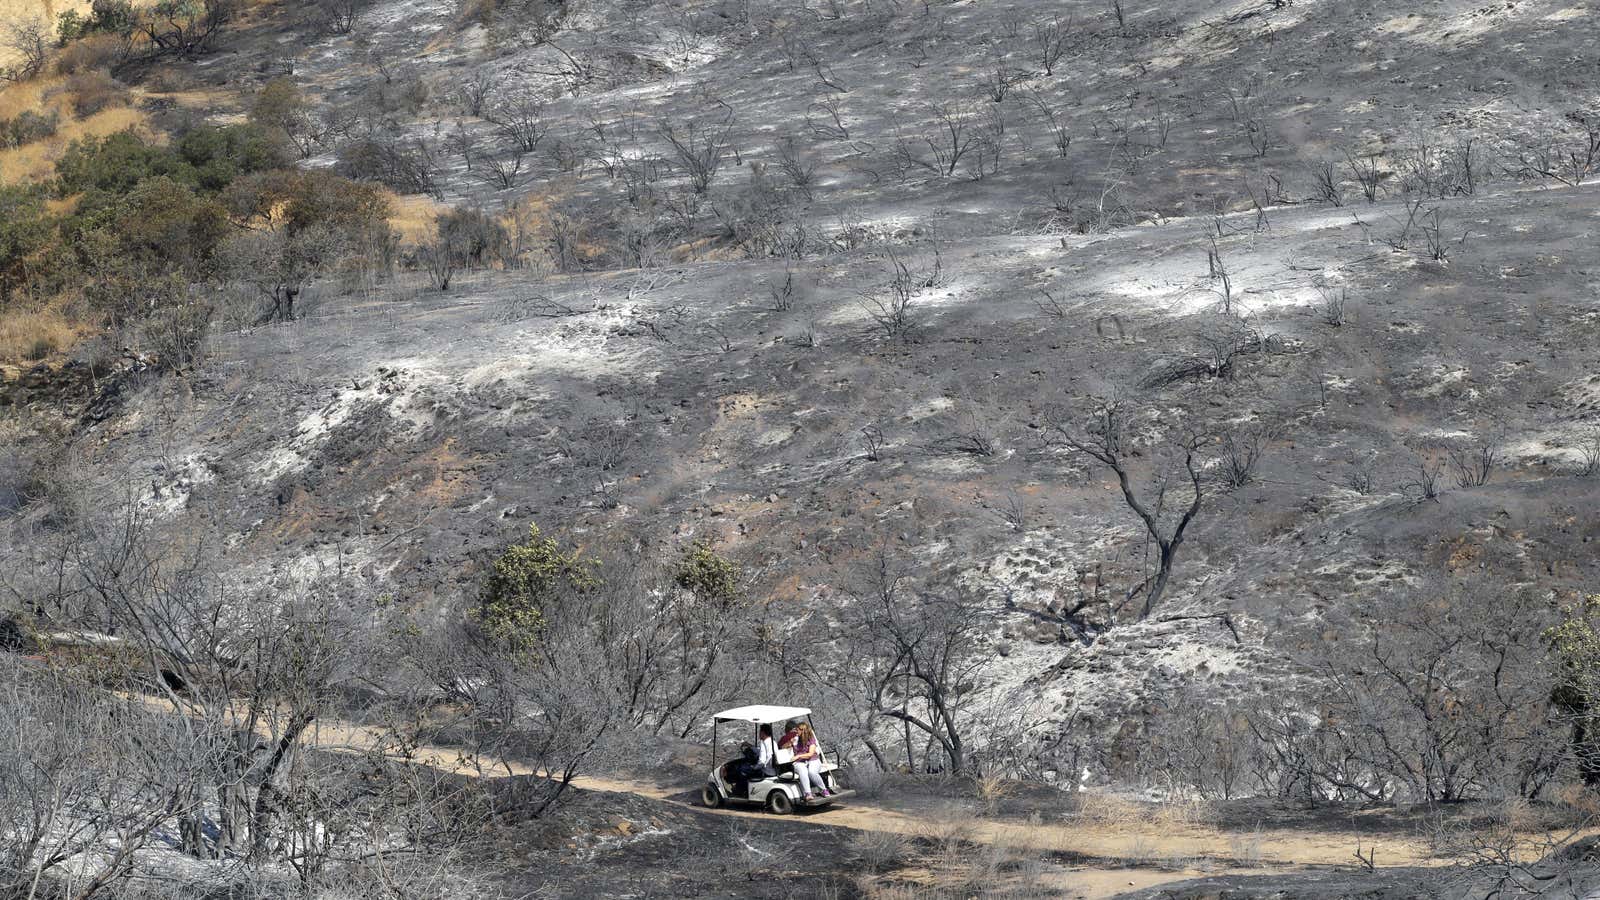 Residents ride a golf cart as they survey the damage caused by the La Tuna fire.